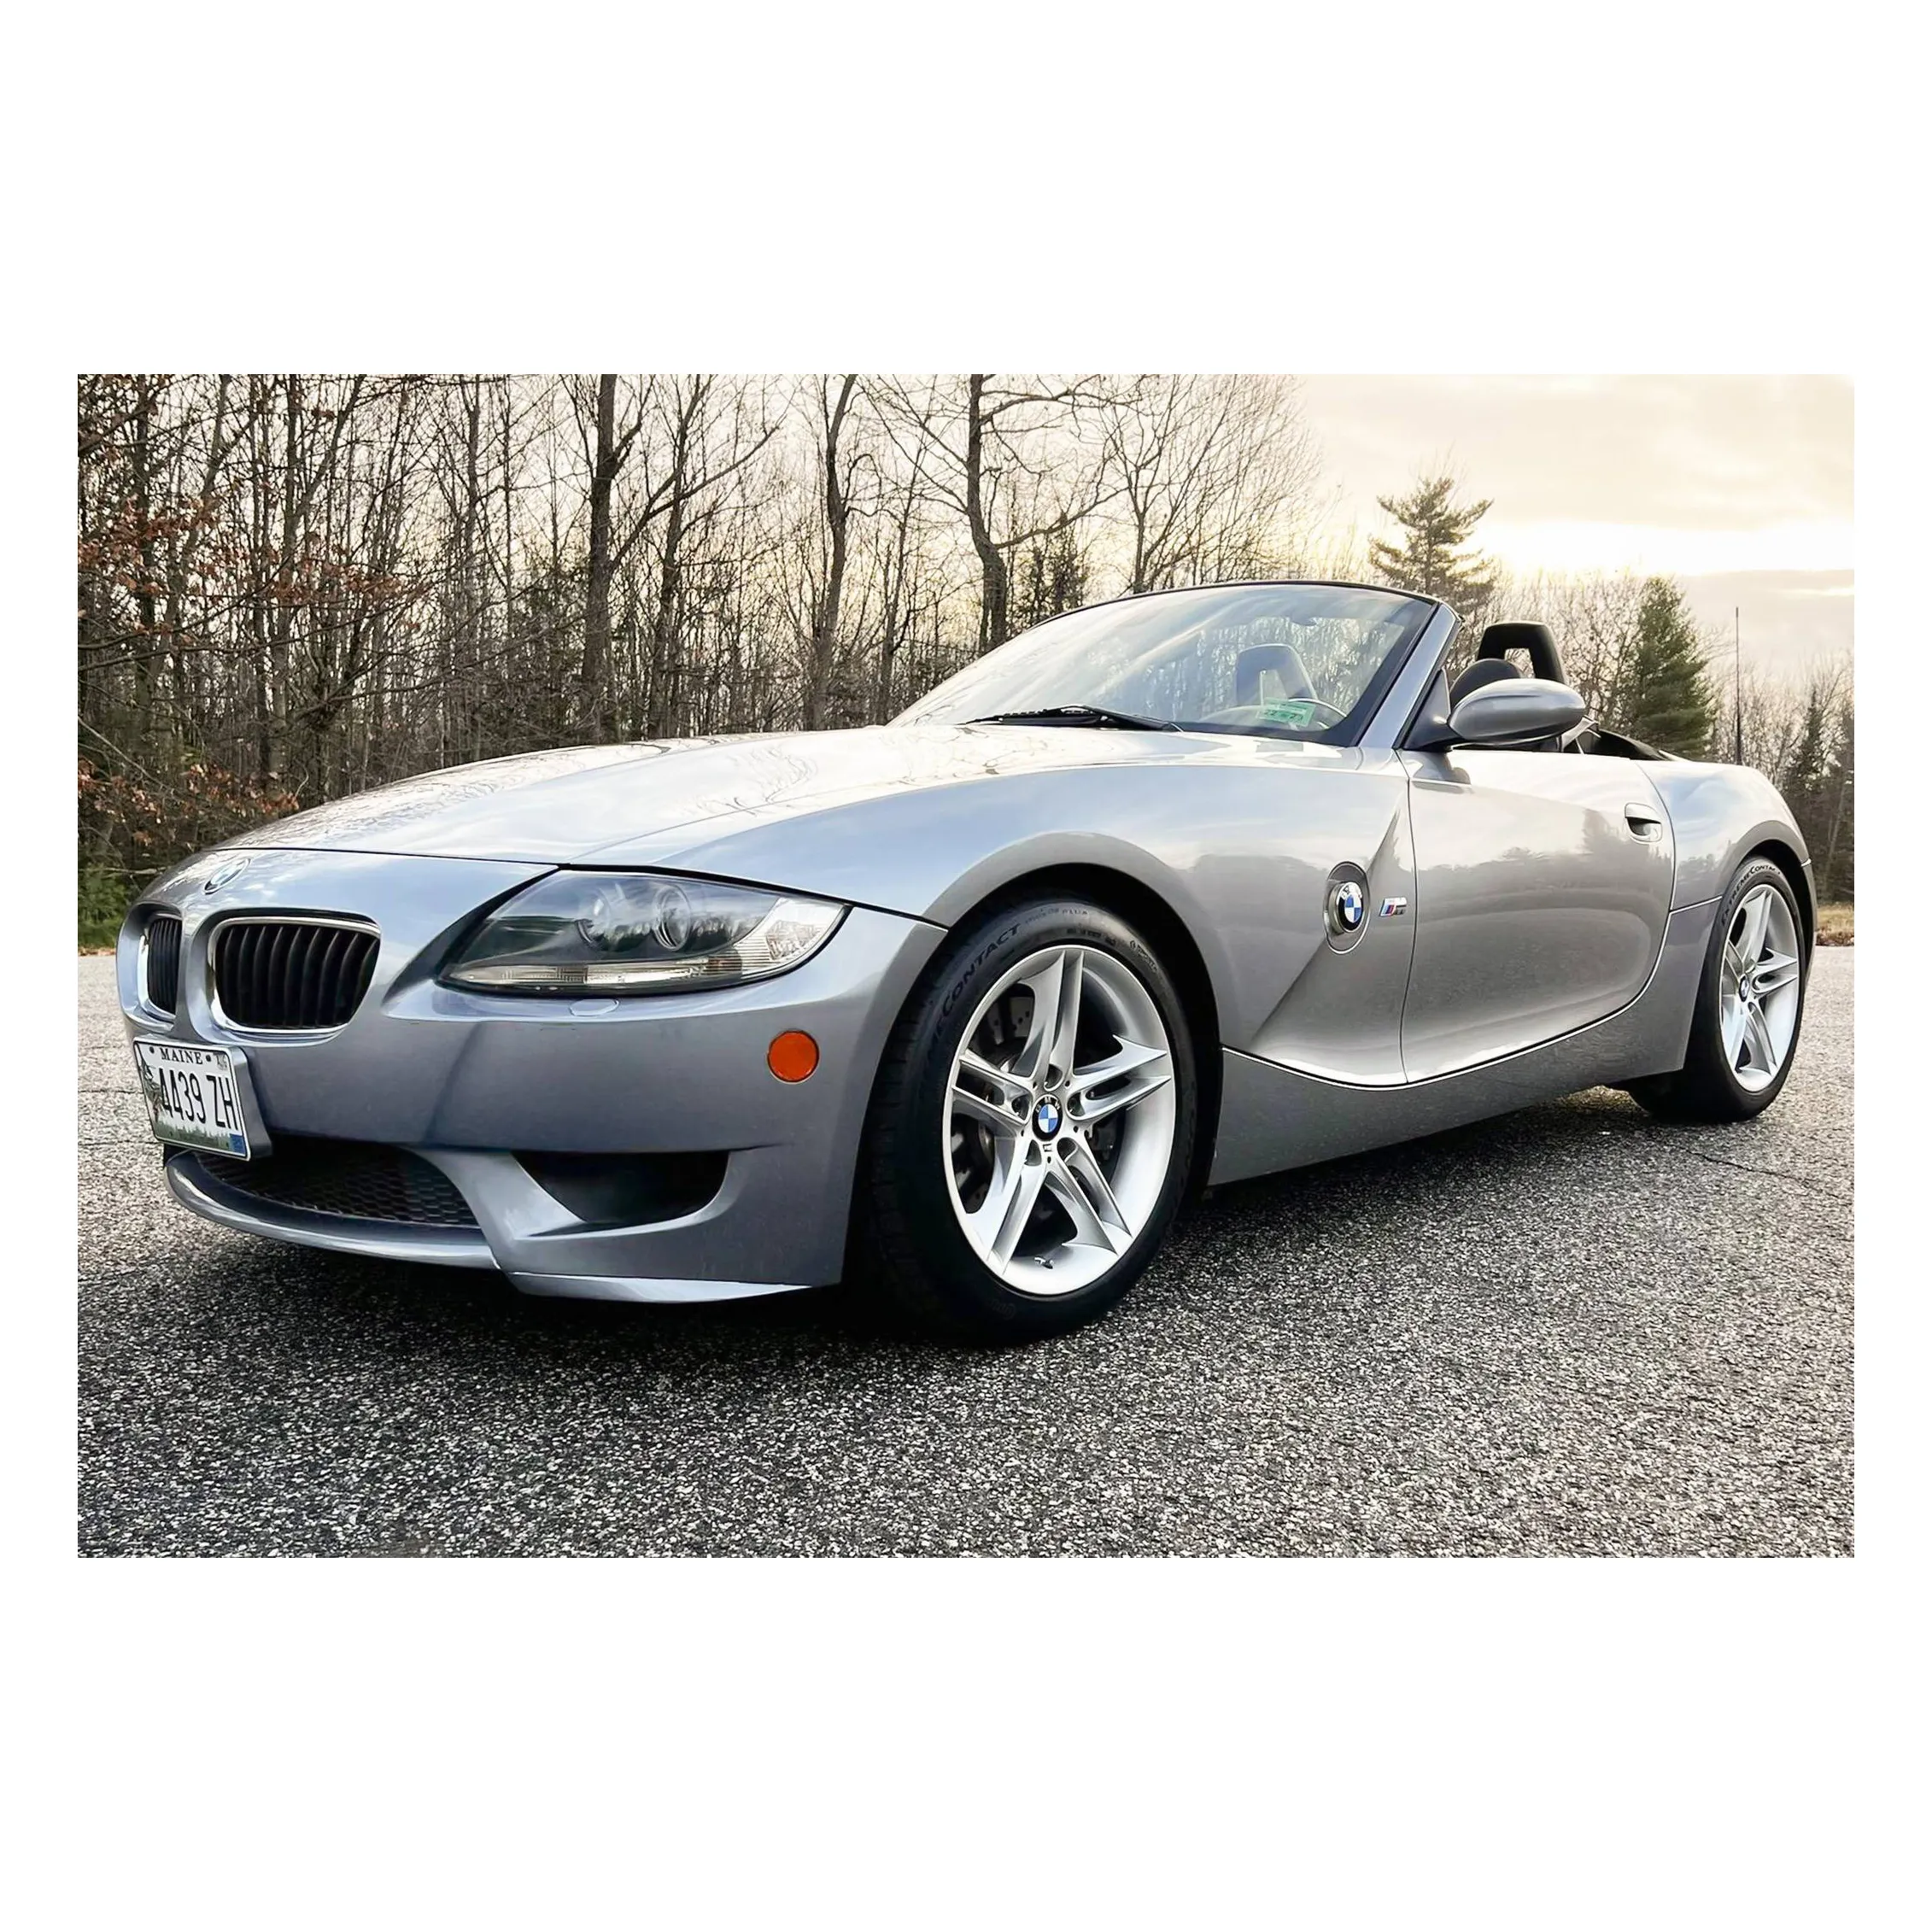 Used Car Price BMW Z4 M Roadster / Off-road Vehicle / Pickup Truck Used Cars Used Cars For Sale